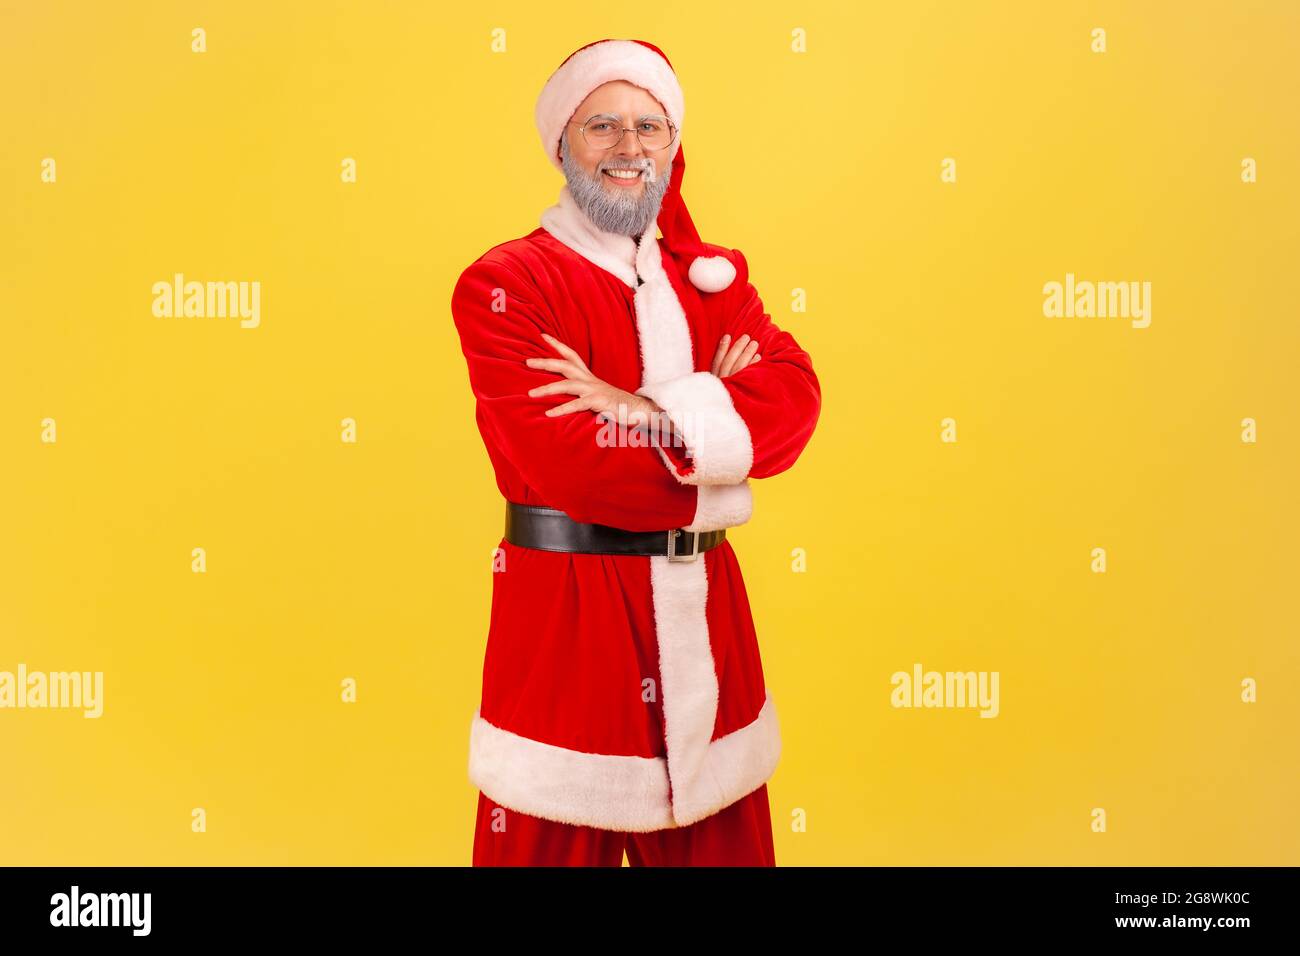 Positive smiling elderly man with gray beard wearing santa claus costume looking directly at camera, keeping hands folded, happy confident expression. Stock Photo